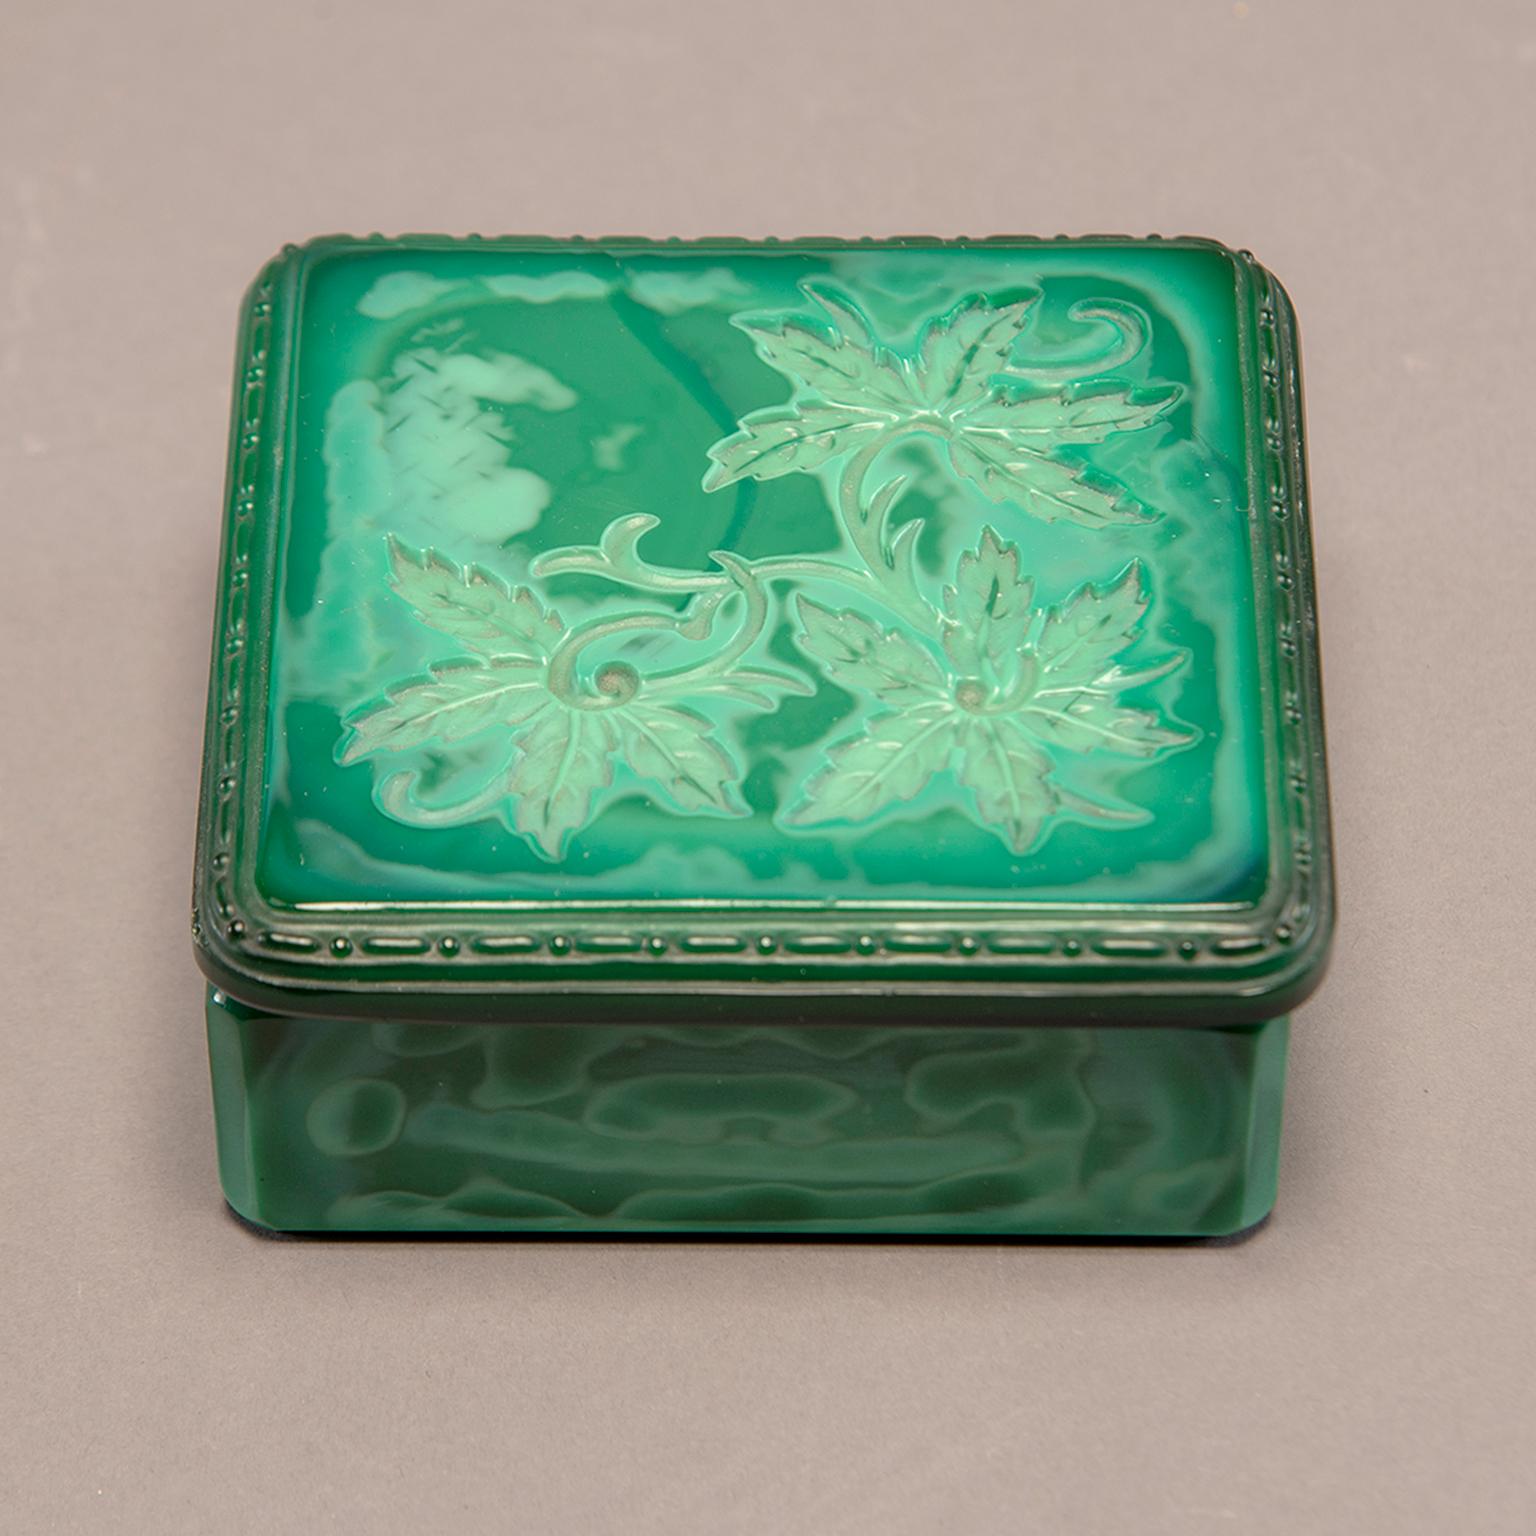 Deco era Czech malachite glass lidded box with leaf design. Unknown maker and pattern. Excellent overall vintage condition.

   